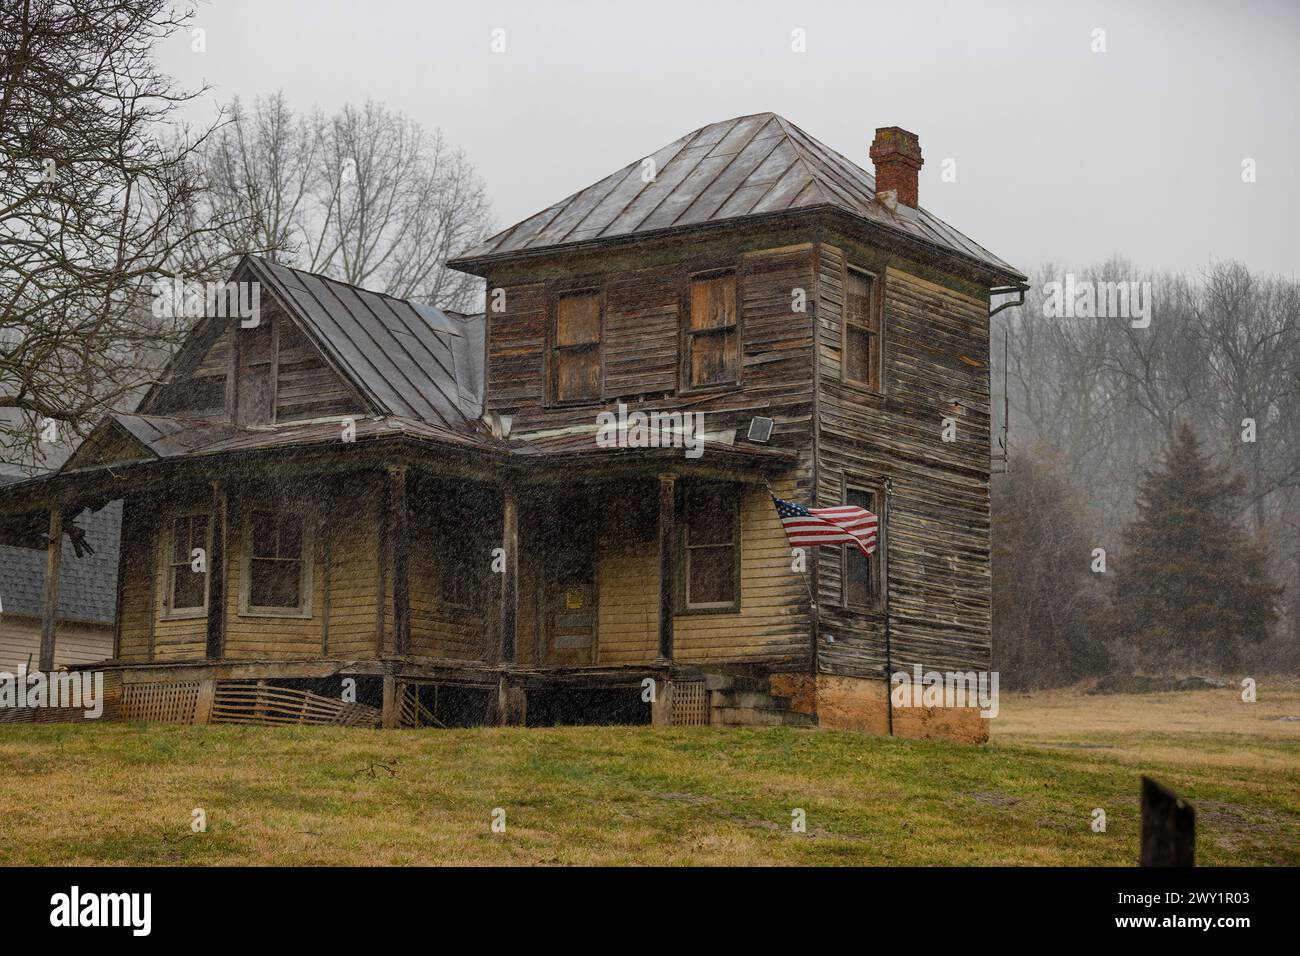 Stokesville, Virginia, USA - Sitting neglected this old home has an American Flag hanging from it's porch in rainy weather. Stock Photo